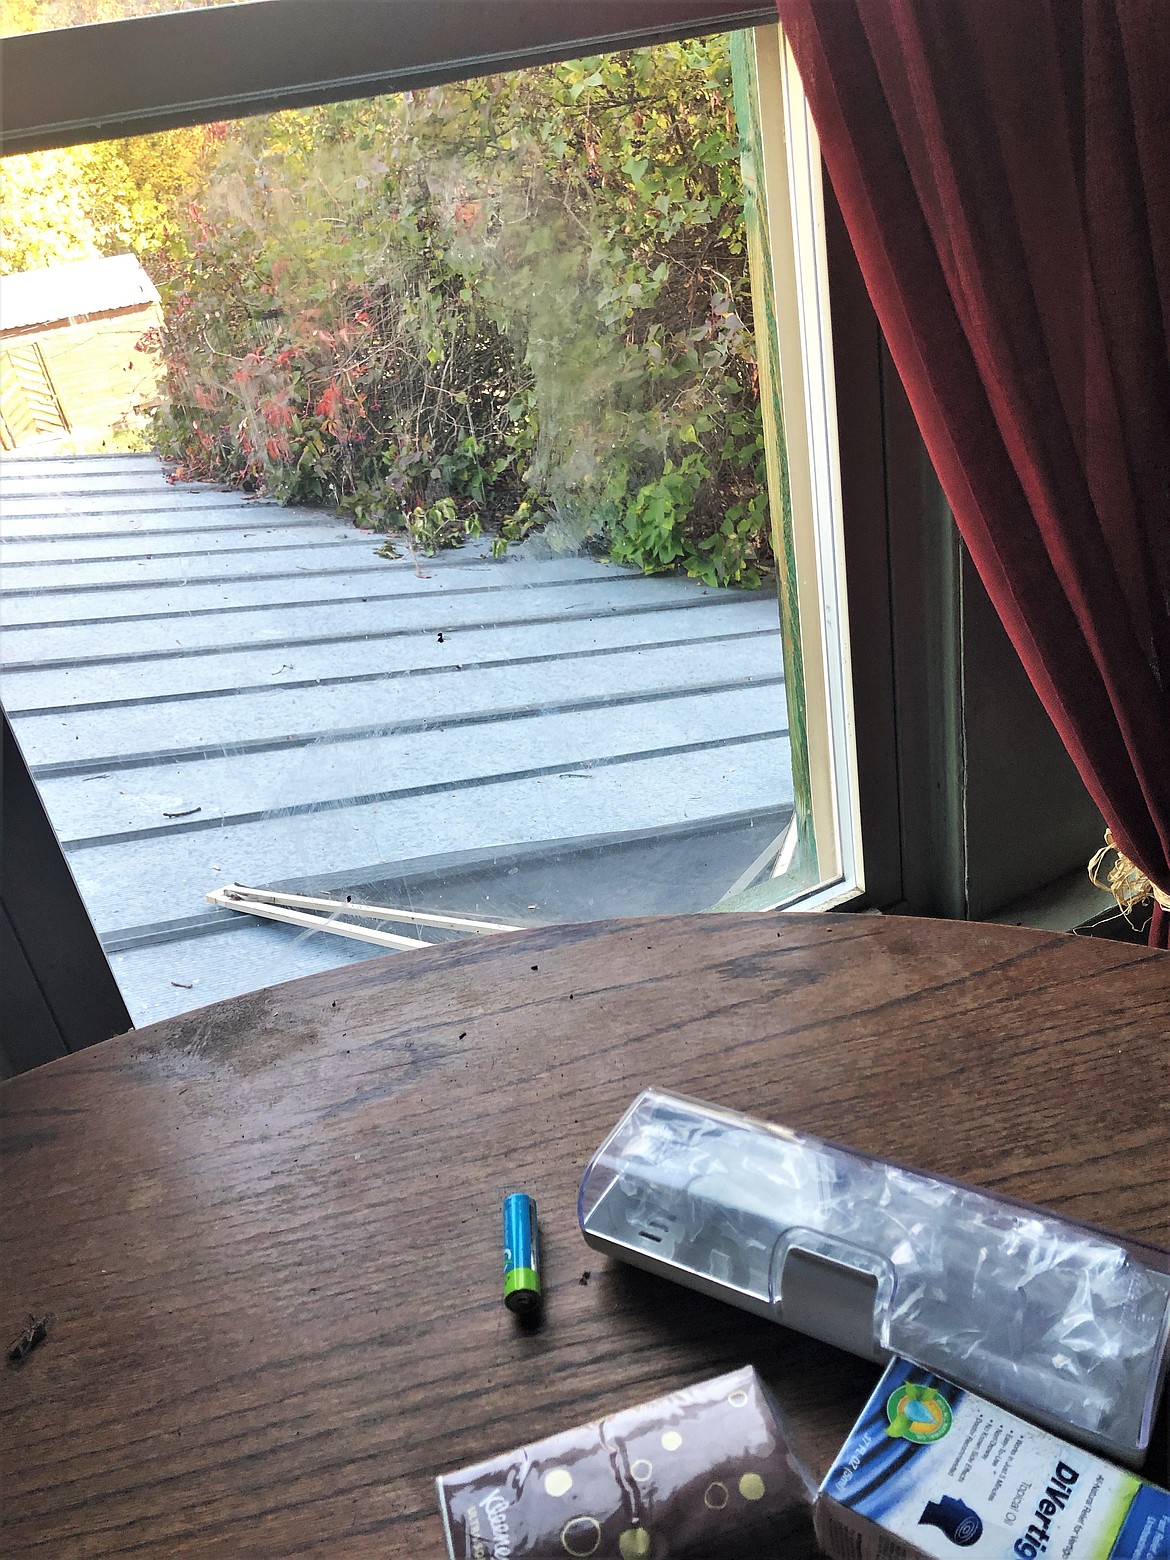 A large black bear climbed the lilac bush to the roof, tore out the screen, and came across the dining room table to explore the kitchen of a home on Mission Creek outside of St. Ignatius last week. (Courtesy of Irene Pritsak)